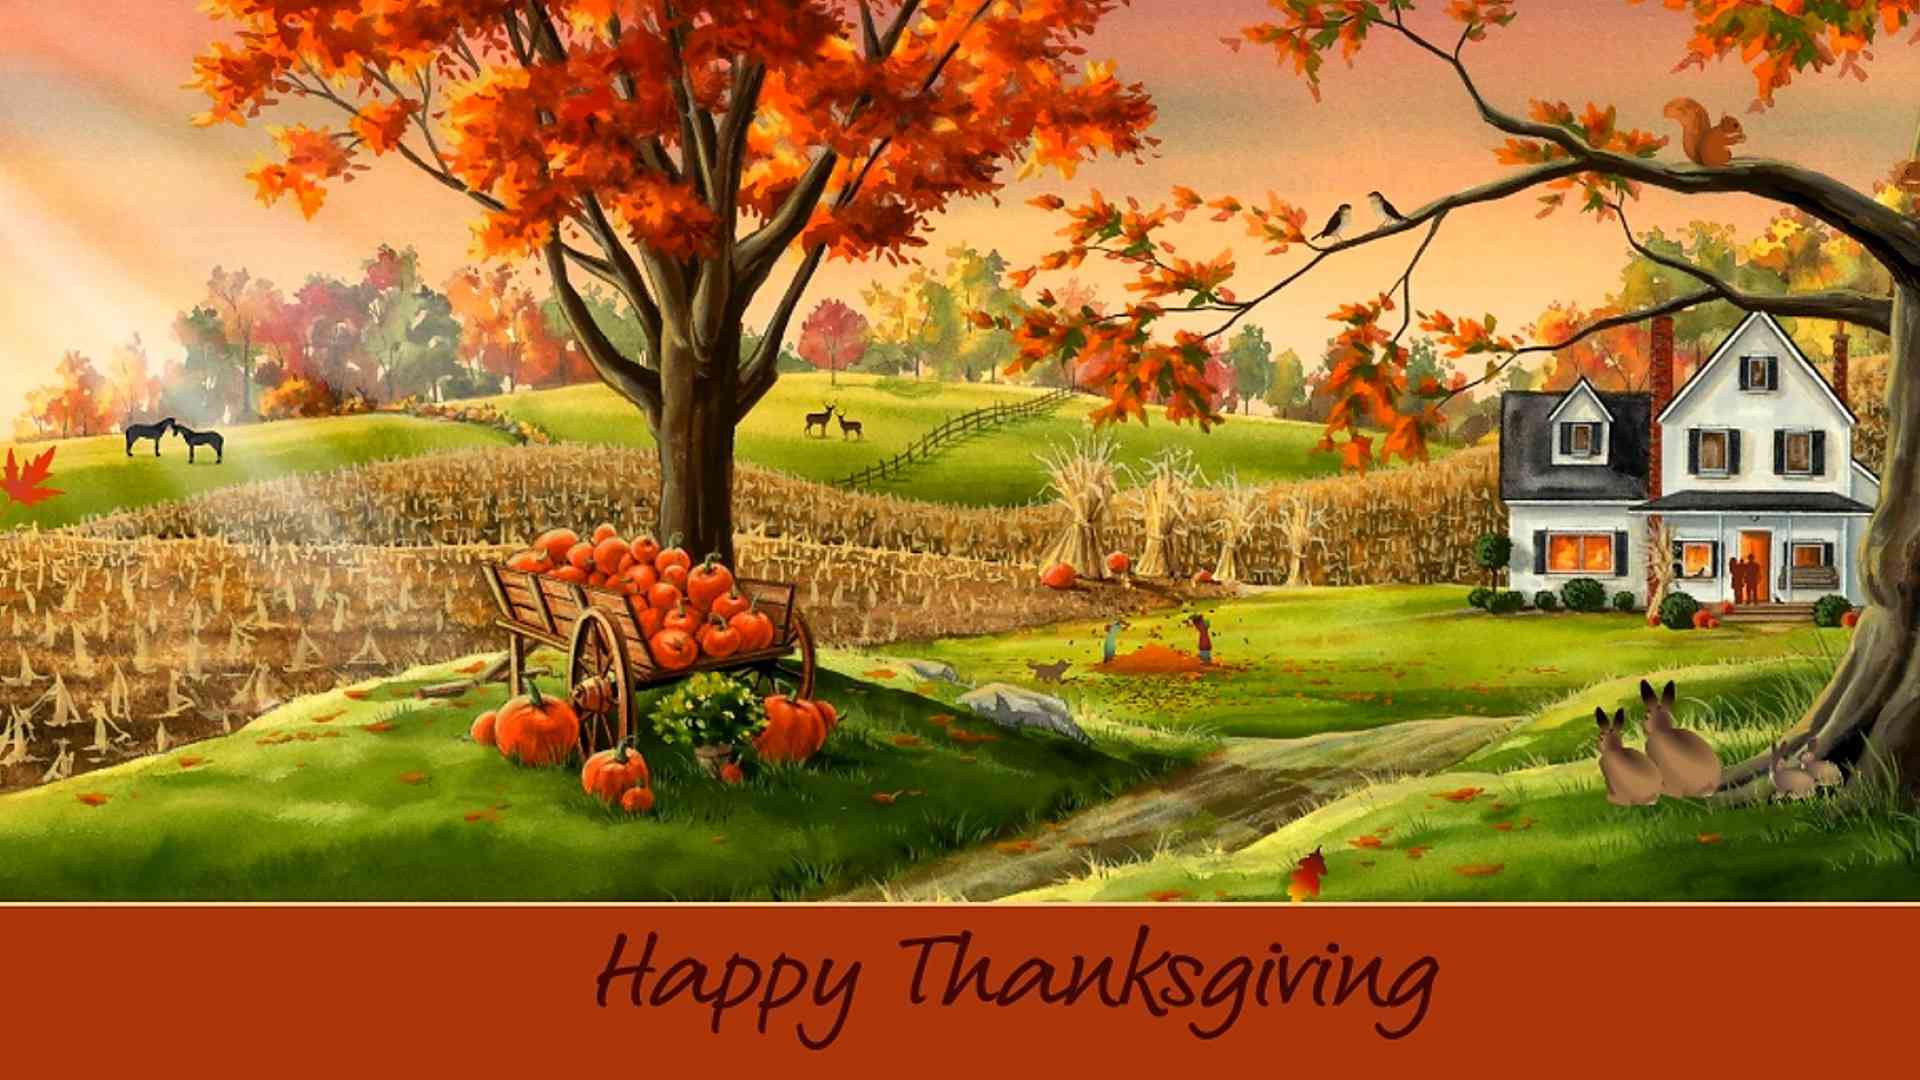 Thanksgiving Scenery Wallpaper Free Thanksgiving Scenery Background